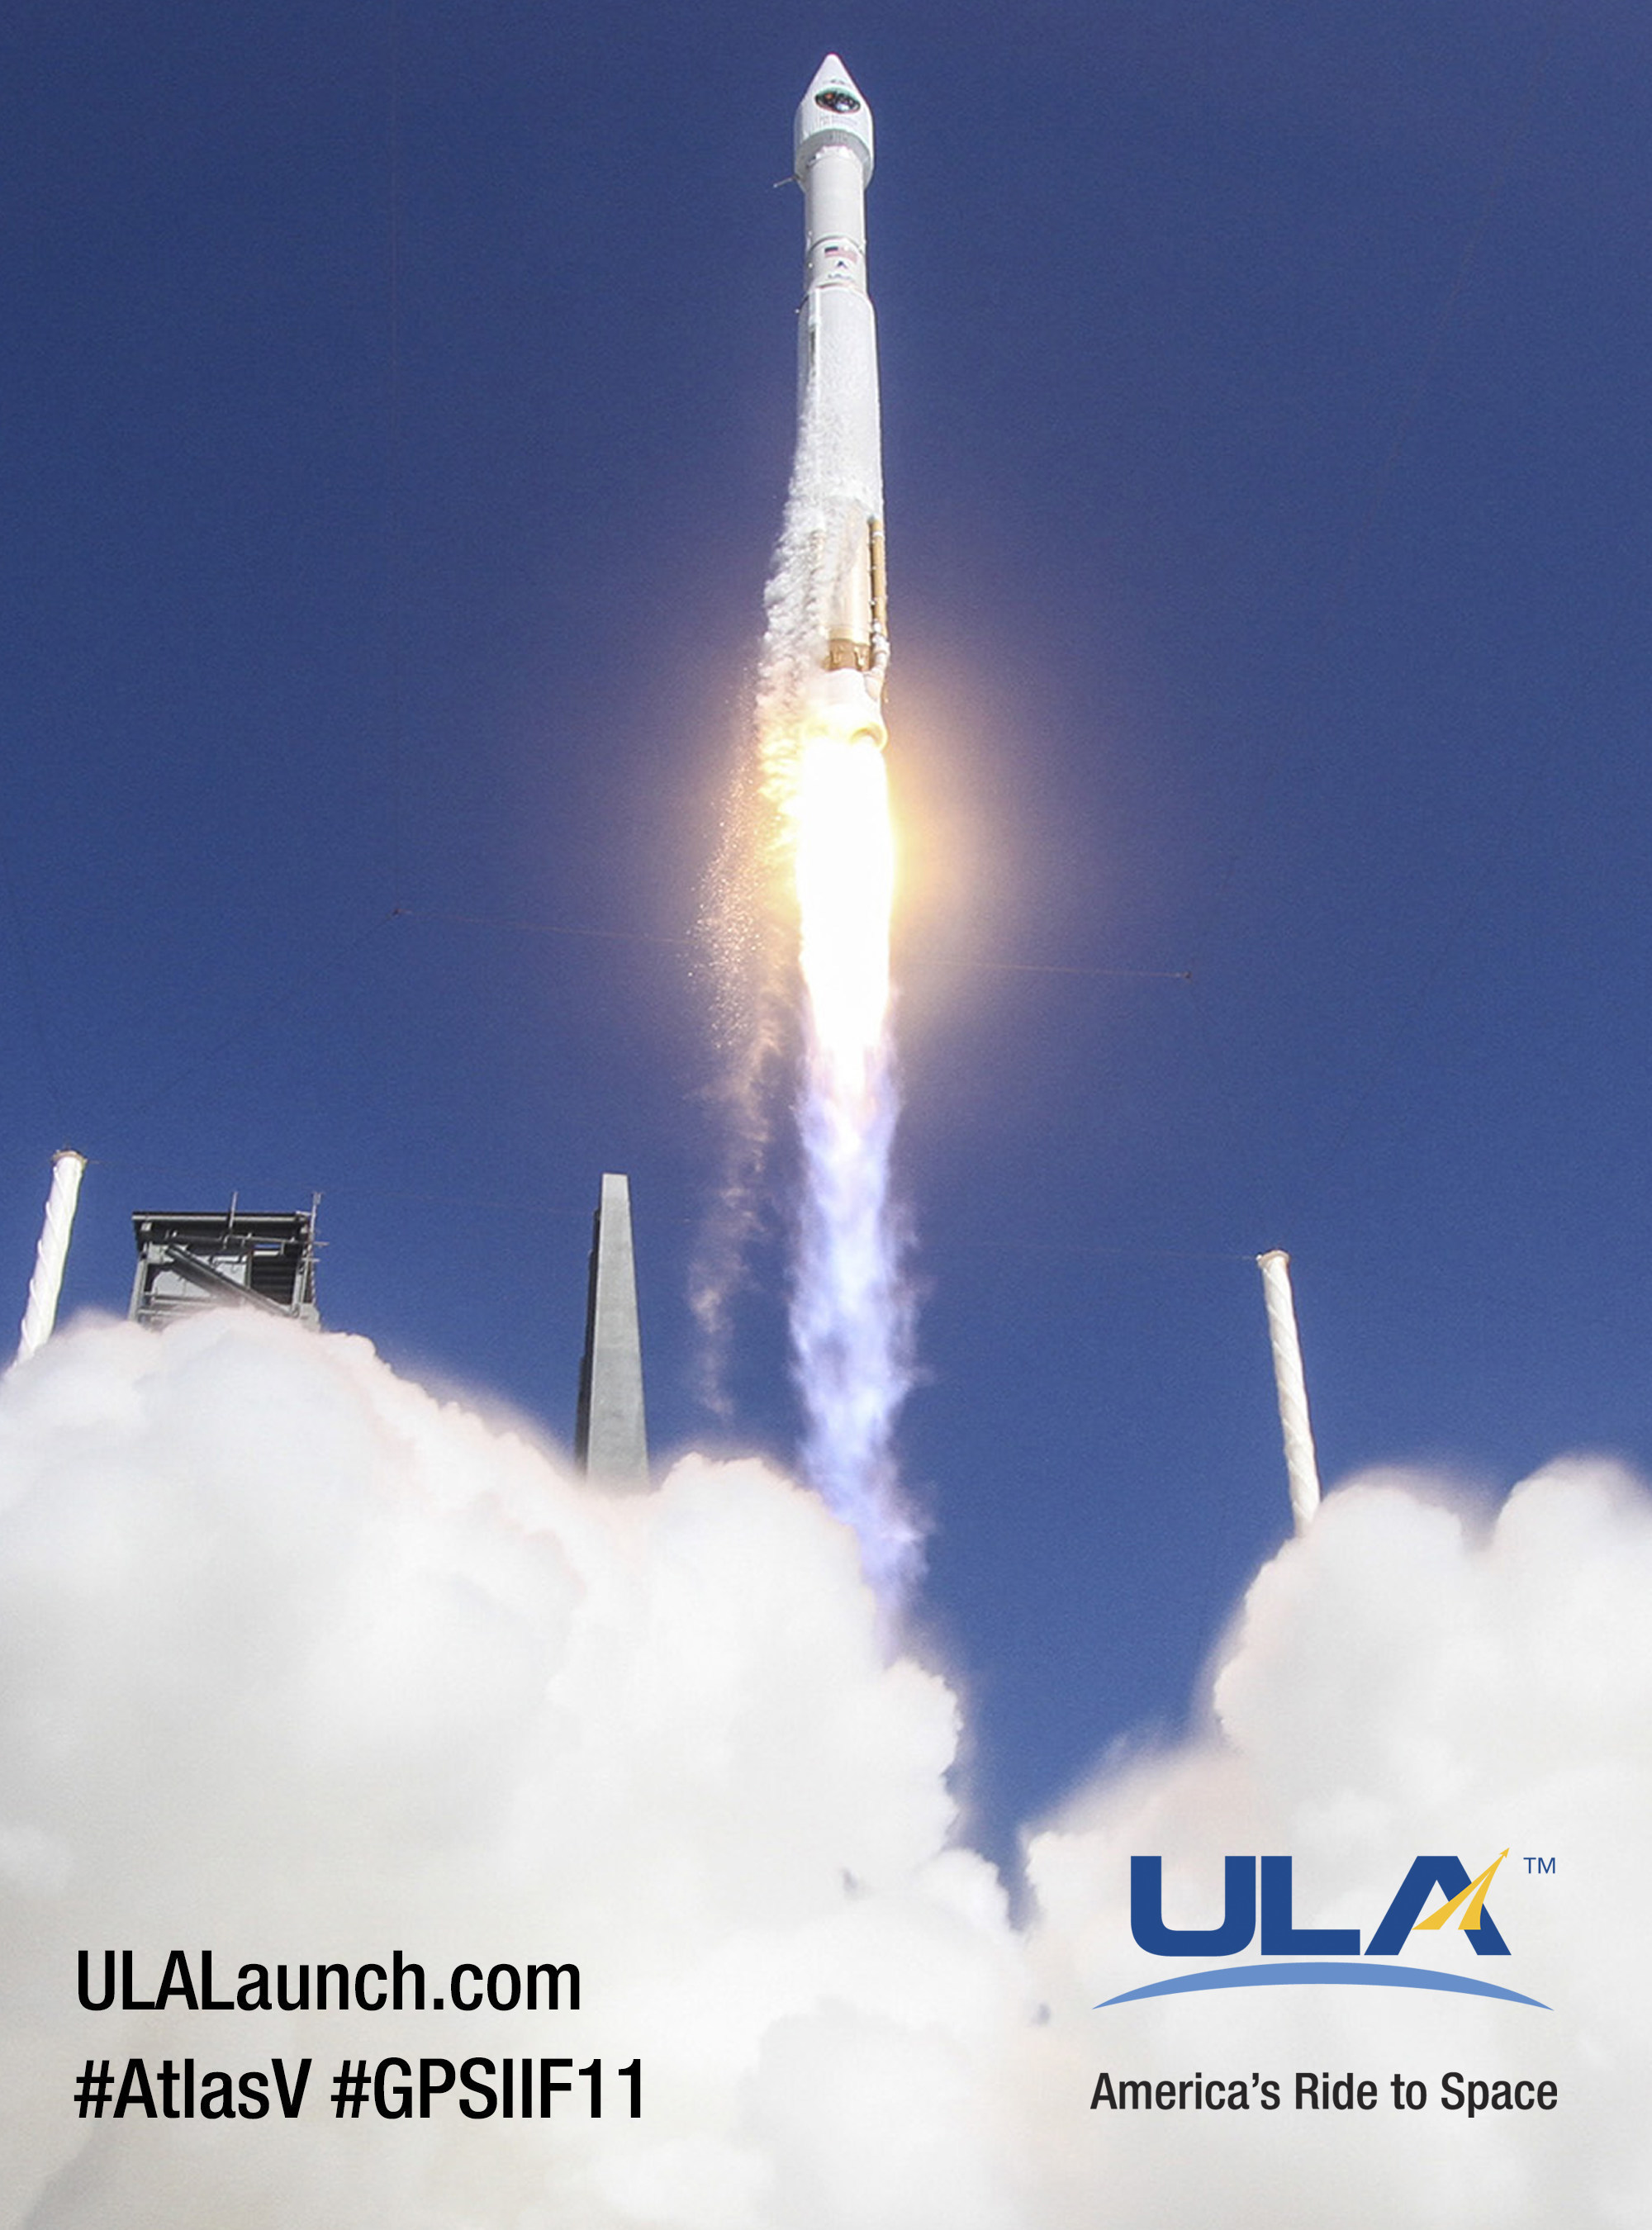 Cape Canaveral Air Force Station, Fla. (Oct. 31, 2015) - A United Launch Alliance (ULA) Atlas V rocket carrying the GPS IIF-11 mission lifted off from Space Launch Complex 41 at 12:13 p.m. EDT. Photo by United Launch Alliance